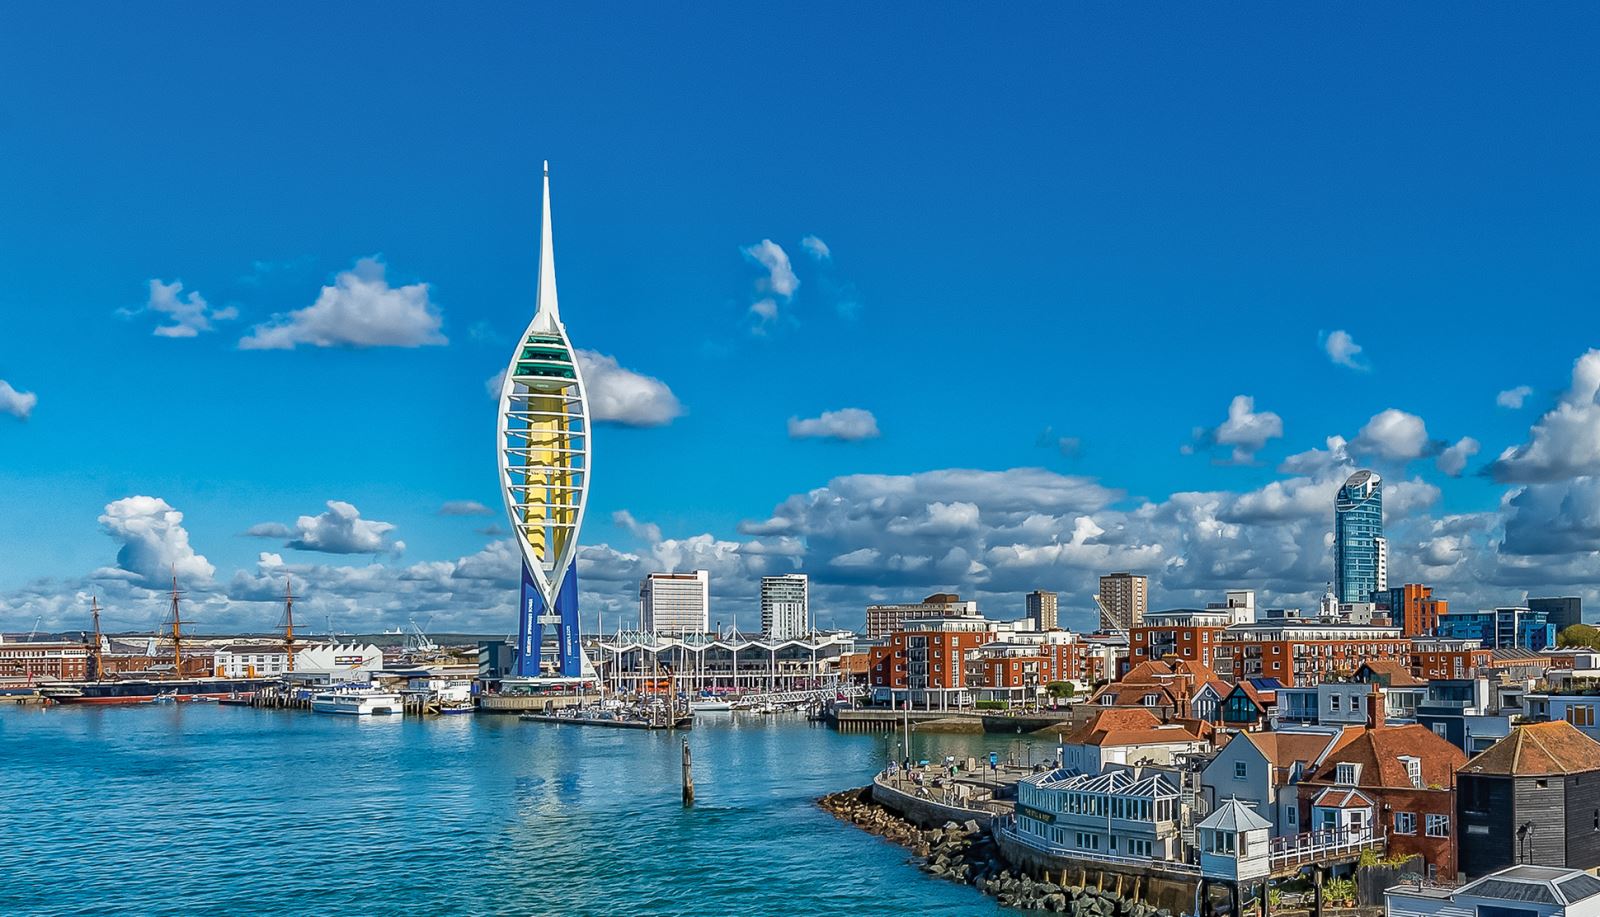 The water font and Spinnaker Tower in the city of Portsmouth